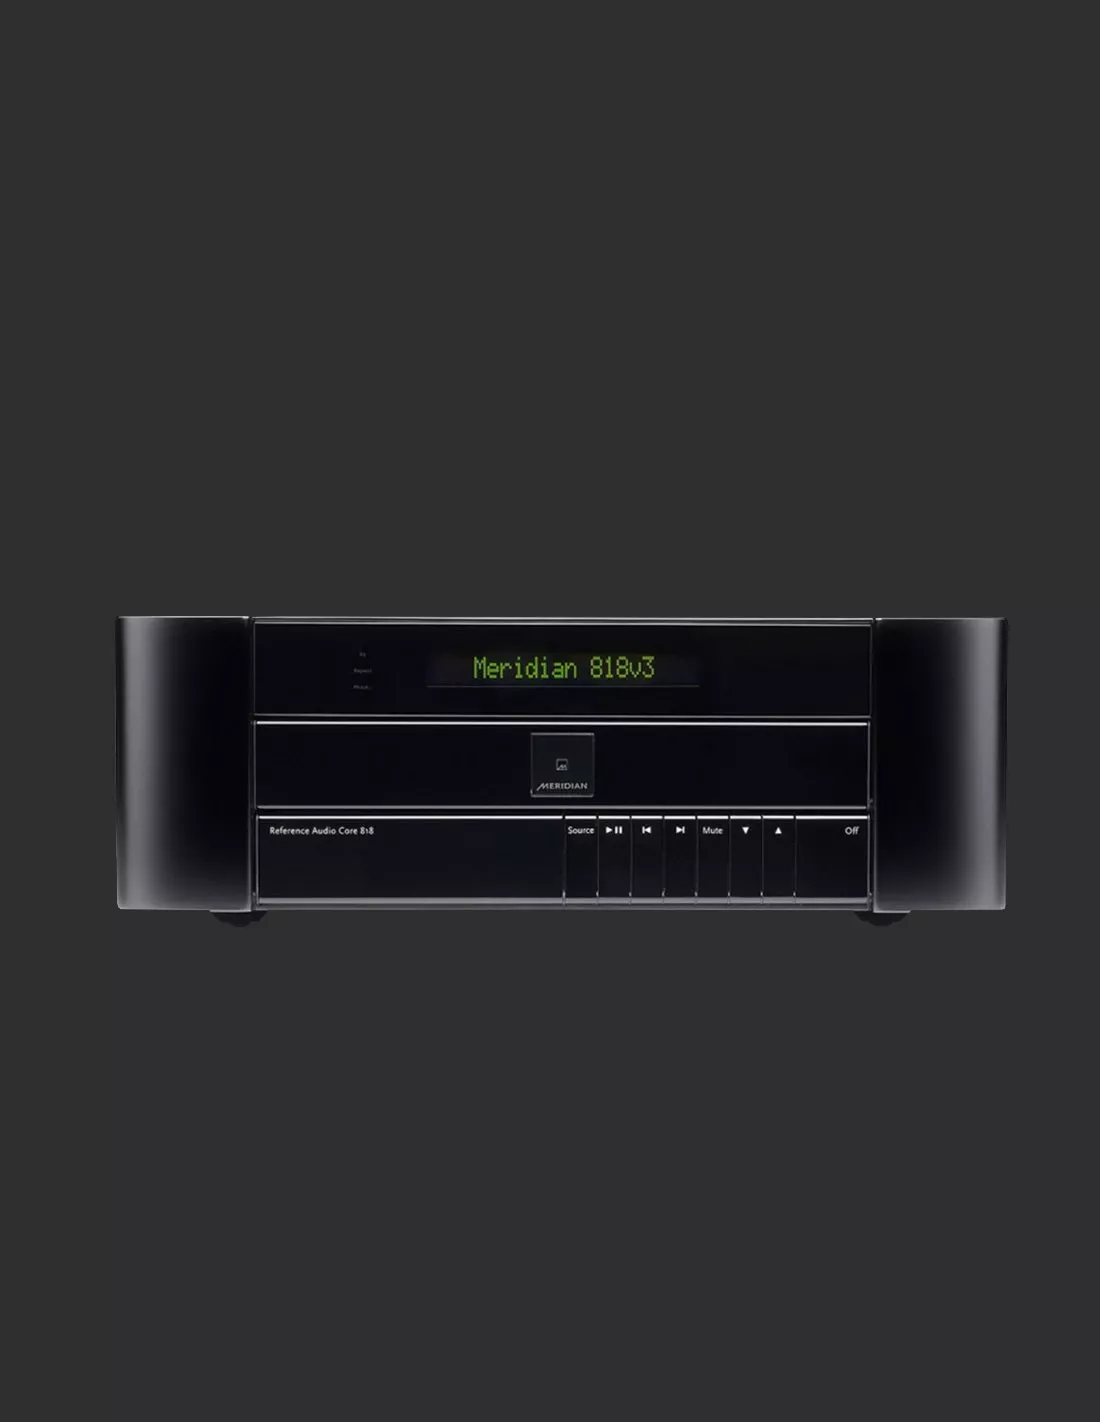 Preamplificator digital Meridian Reference 818v3, [],audioclub.ro